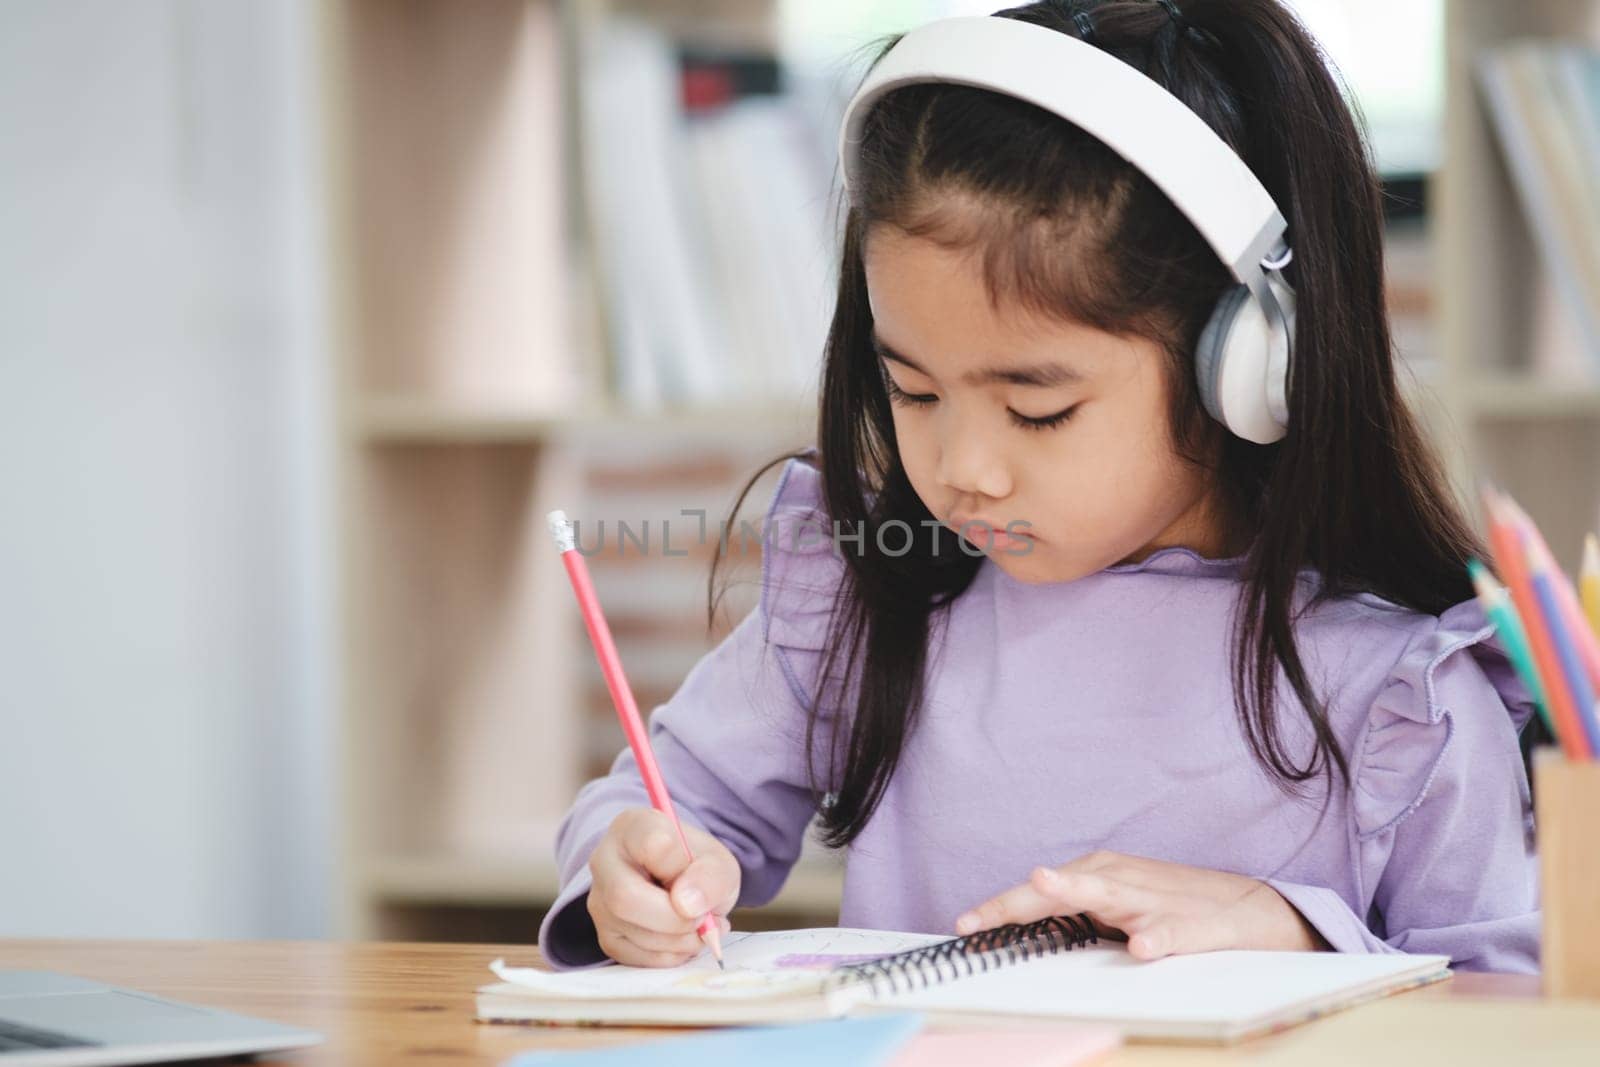 A young girl is sitting at a desk with a pencil and a notebook. She is wearing headphones and she is focused on her work. The scene suggests that she is engaged in a task that requires concentration